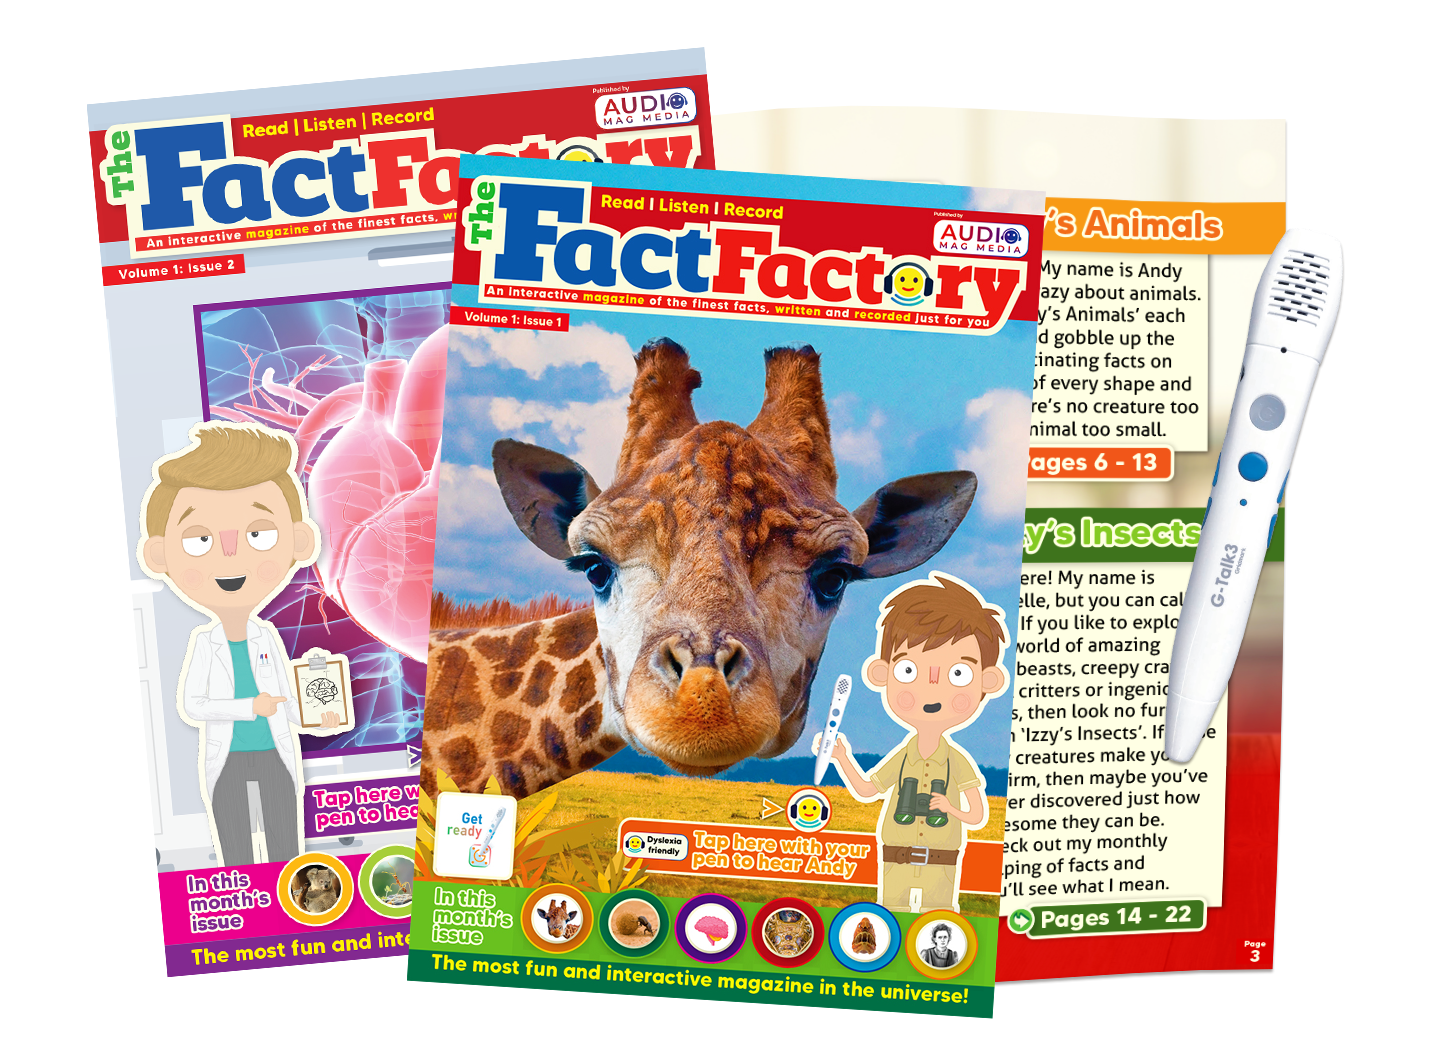 The Fact Factory magazine for children, showing a magazine cover with a cartoon child and a giraffe and a digital pen that relays the audio version of the magazine text.